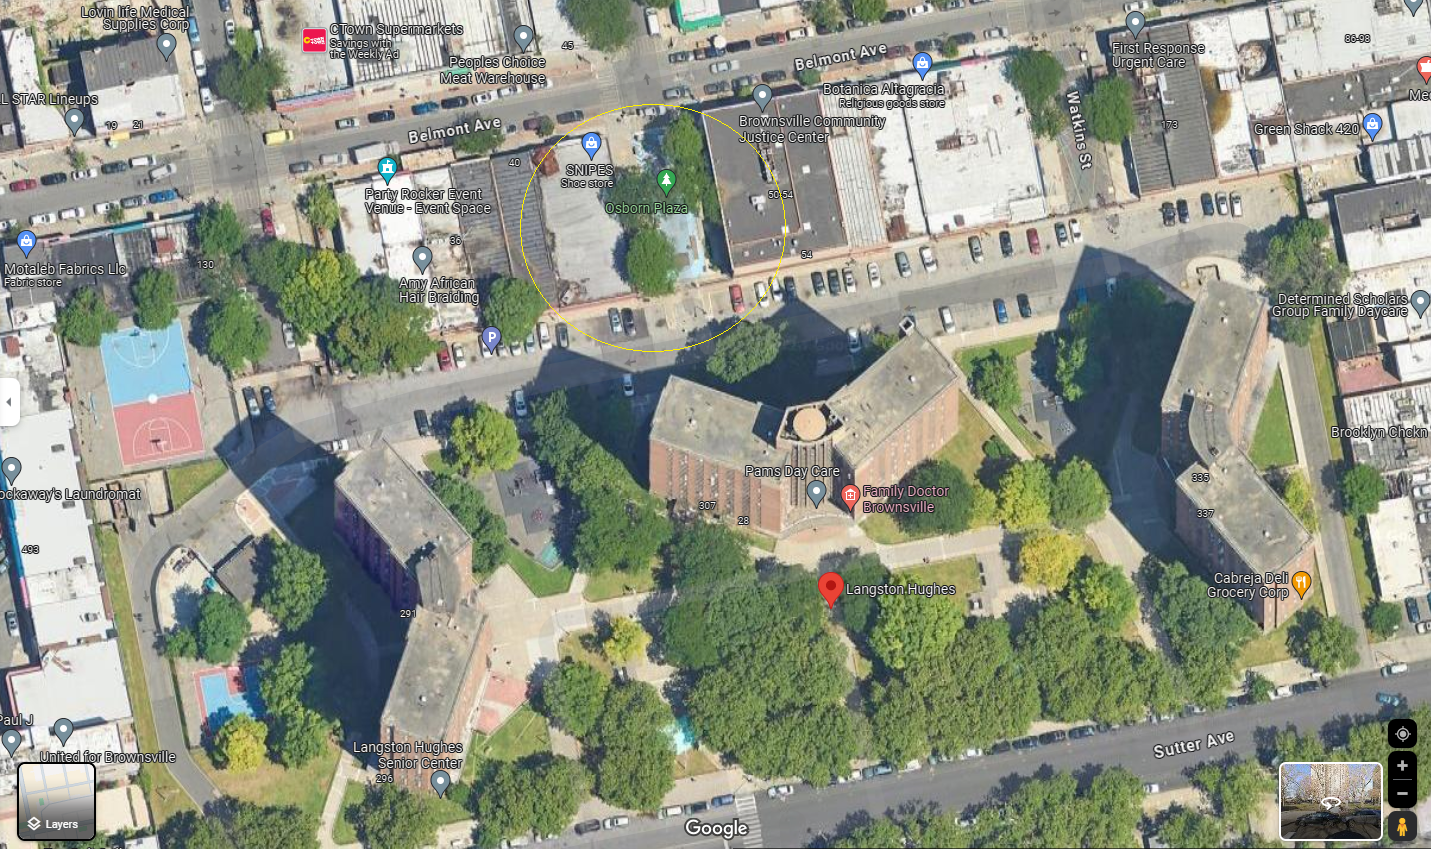 map of location of plaza and nearby NYCHA building and Justice Center